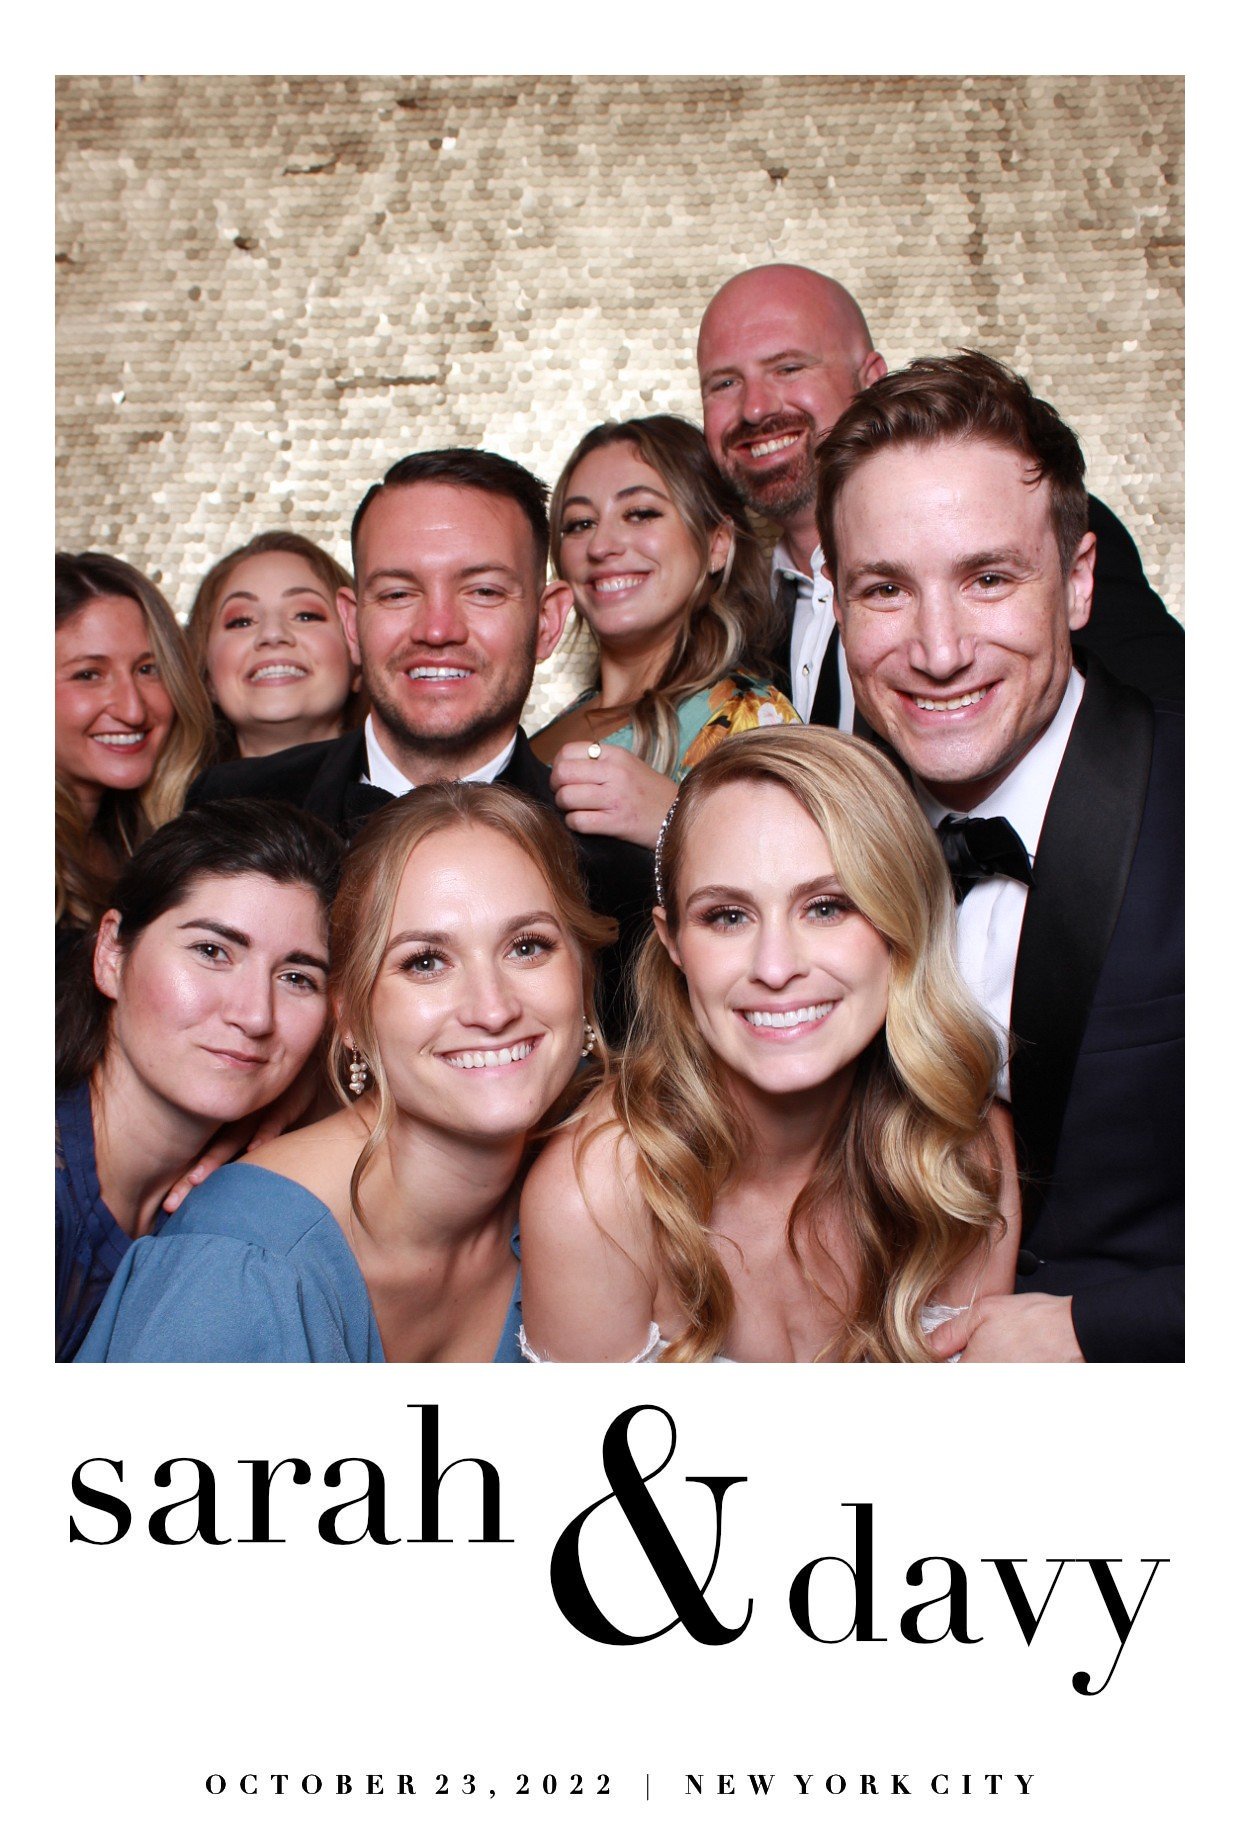 St. Regis Hotel NYC Photo Booth by InstaMemoryBooth by Angelica Criscuolo Photography